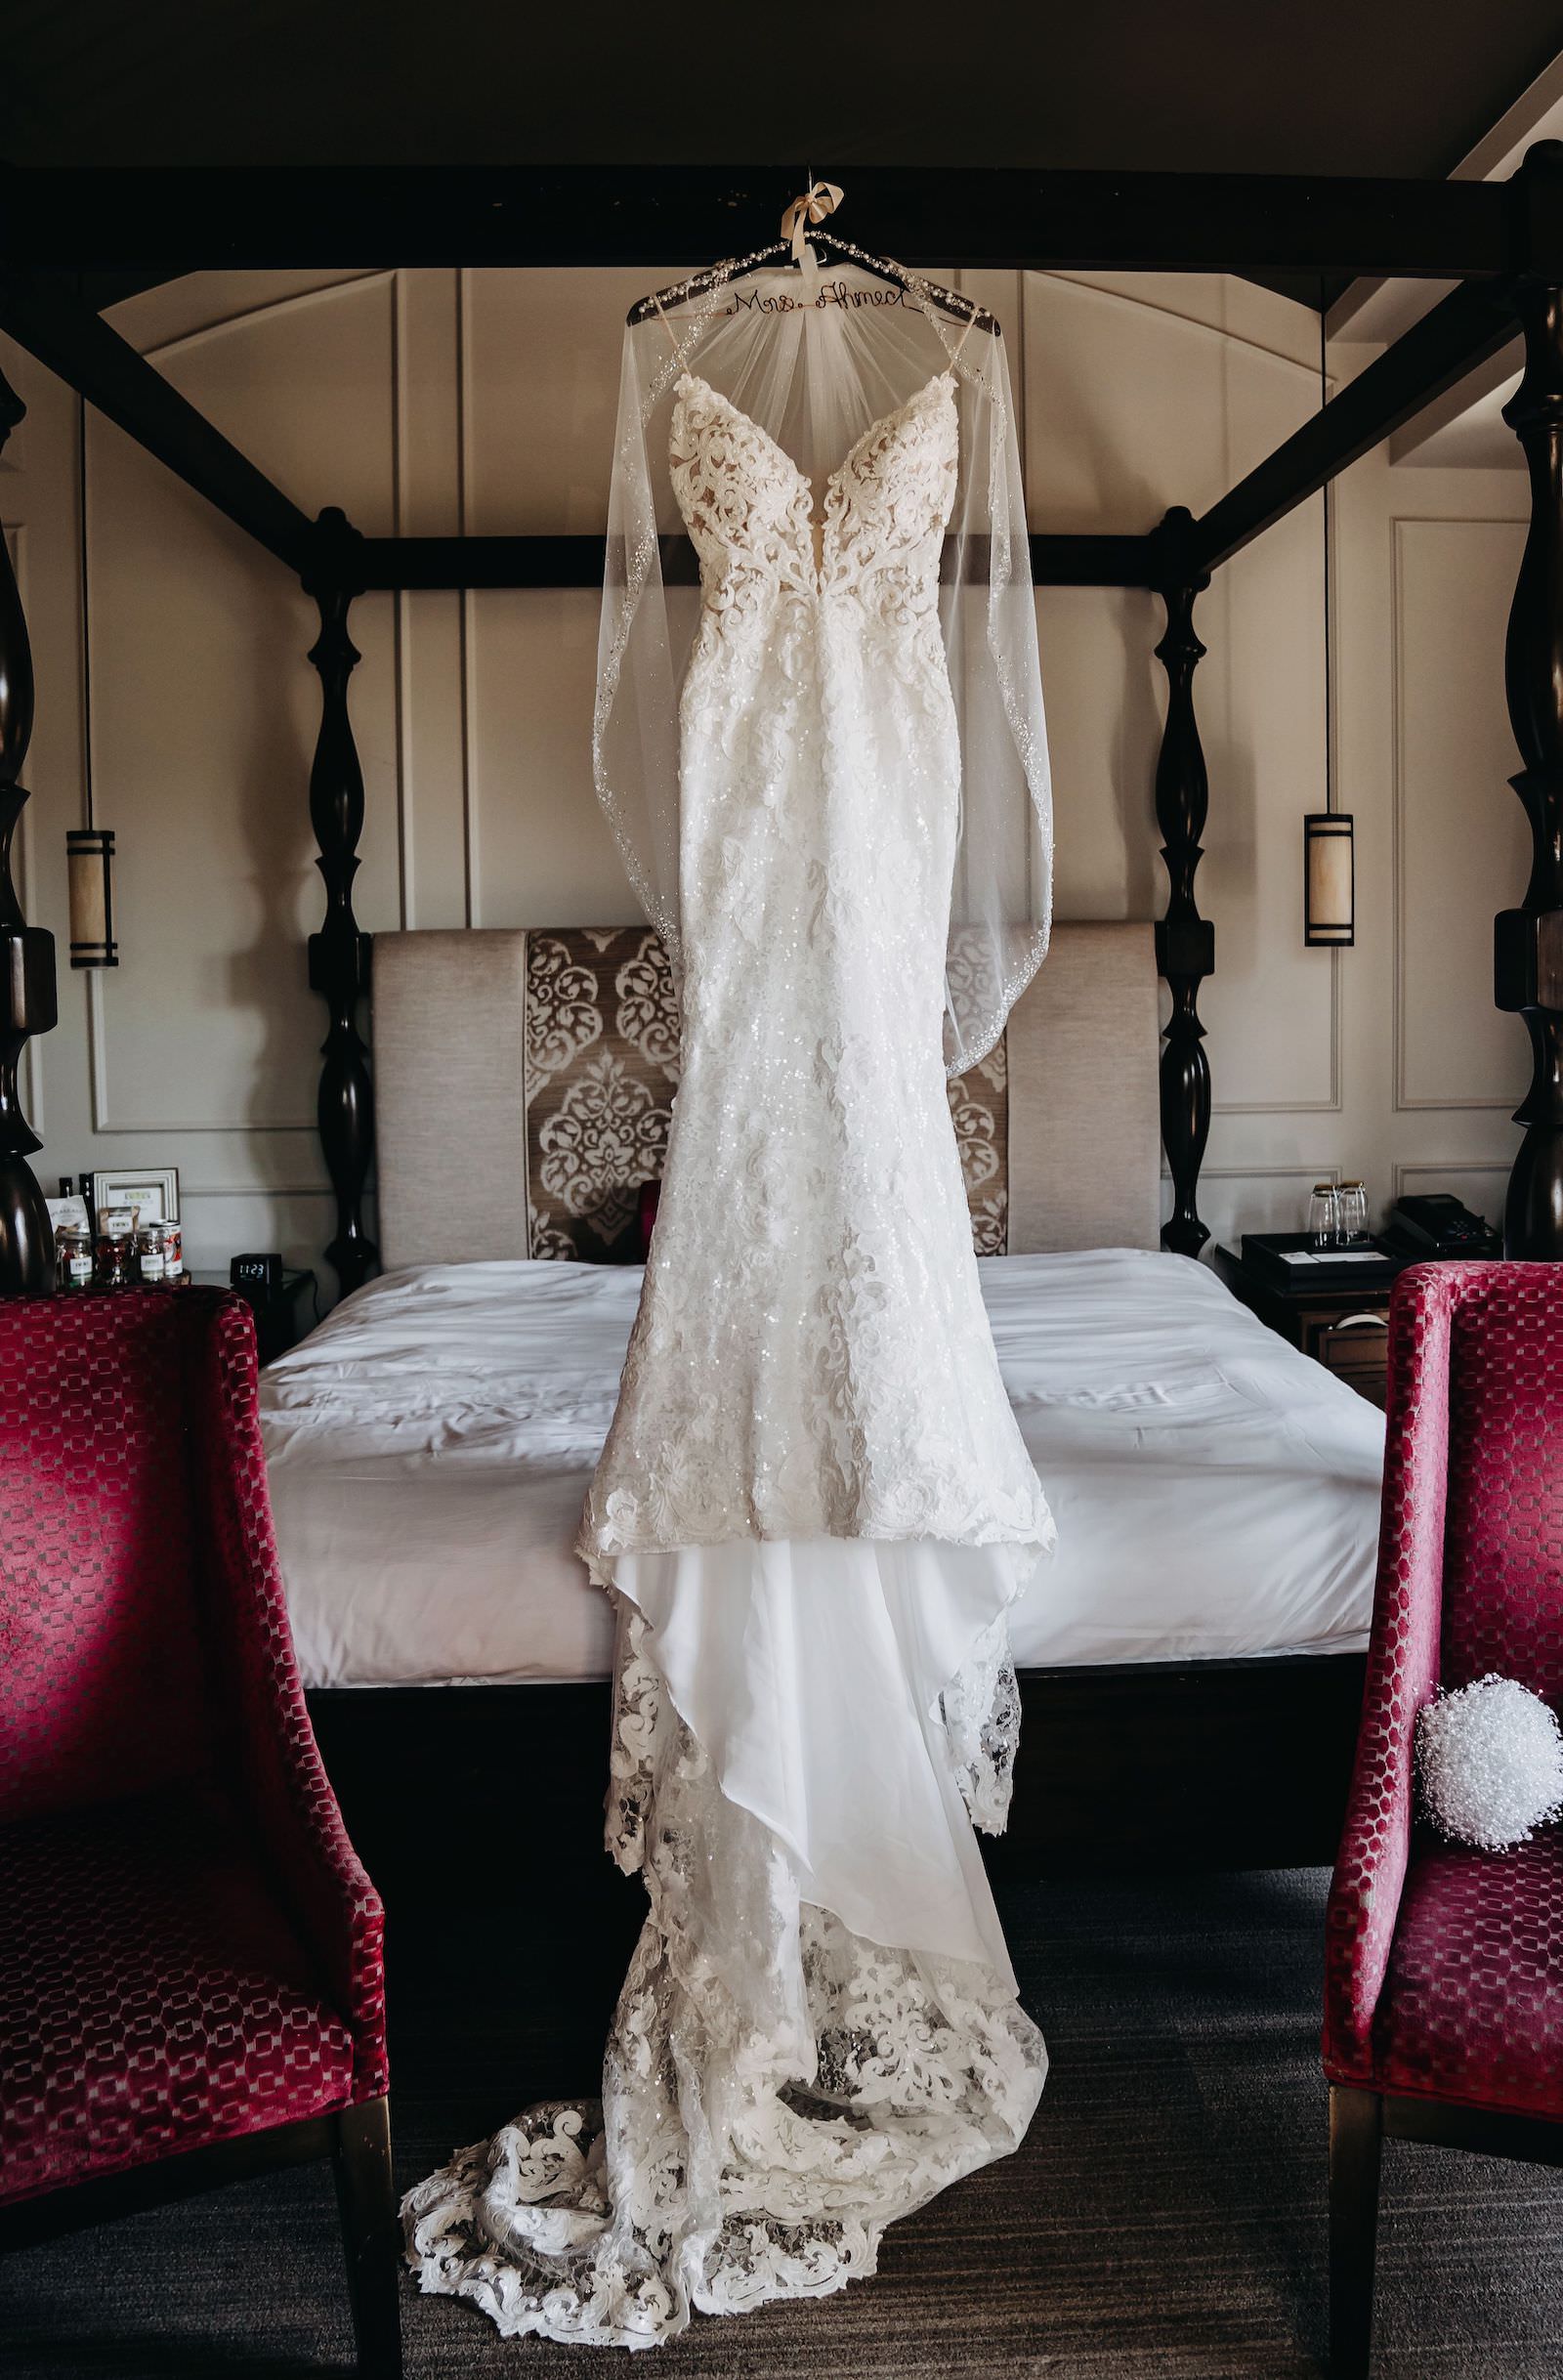 Lace and Illusion Fitted Wedding Dress with Veil Hanging on Bed